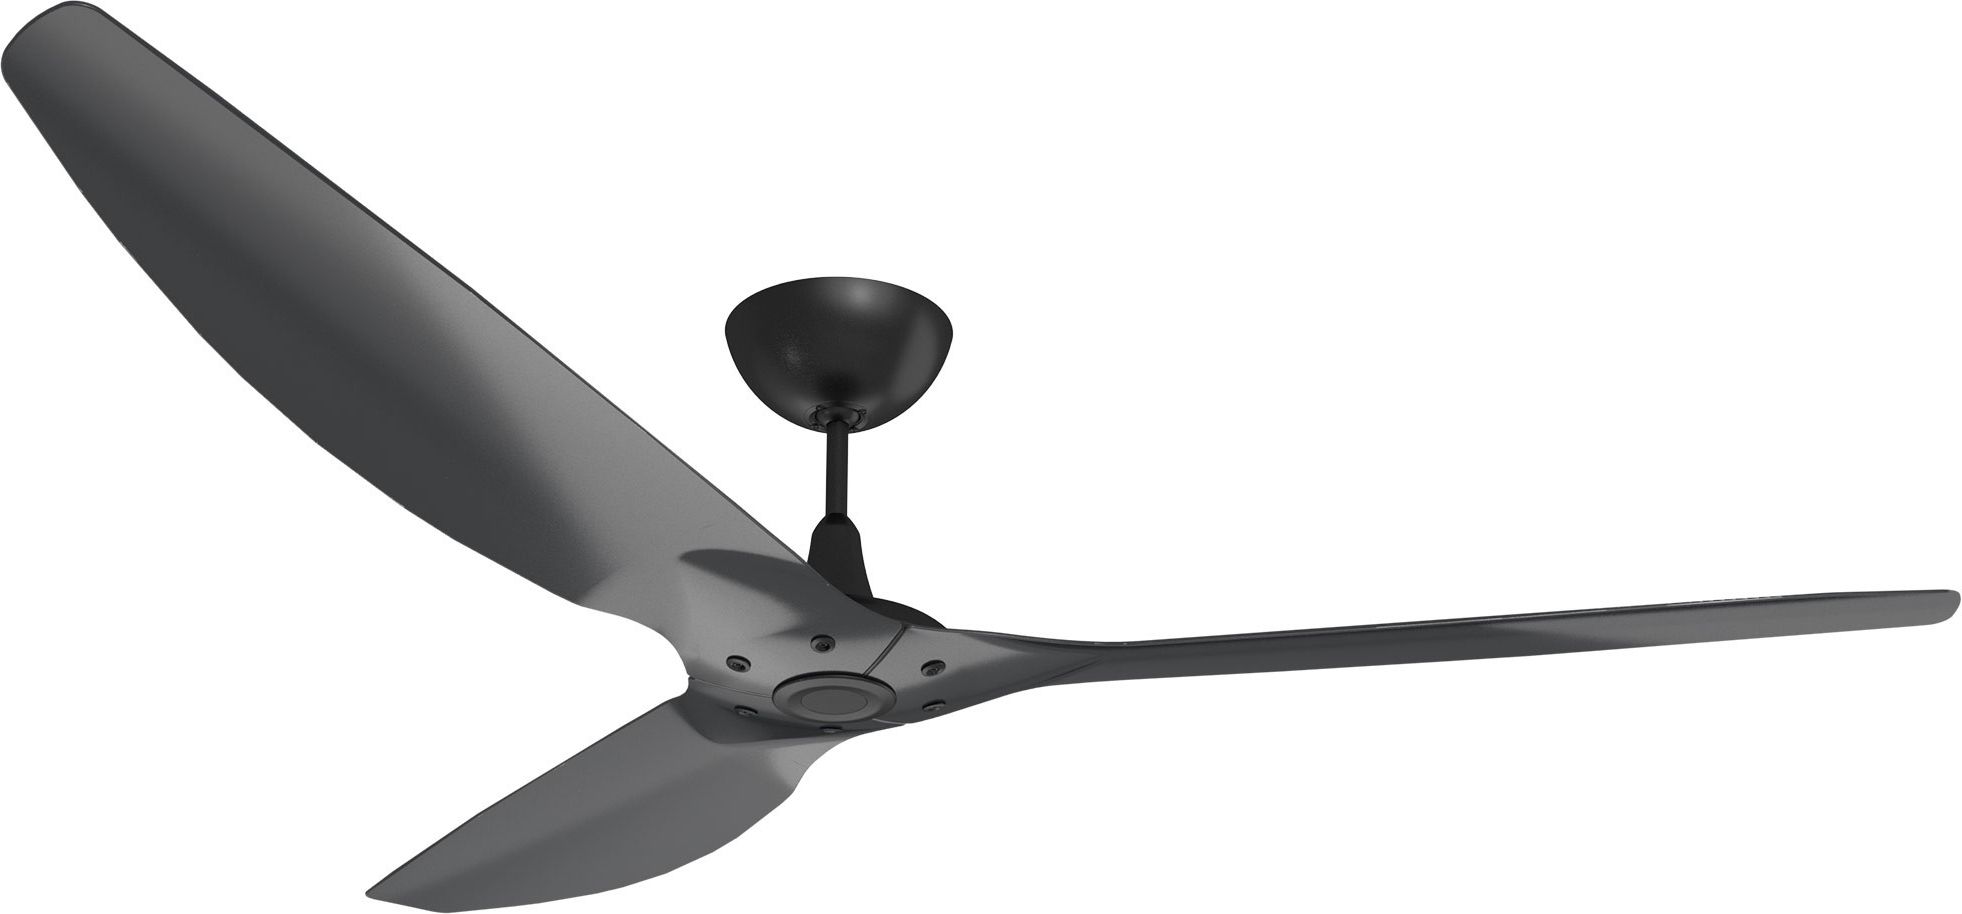 Widely Used Black Outdoor Ceiling Fans In Haiku Outdoor Ceiling Fan: 84", Black Aluminum, Universal Mount (View 4 of 20)